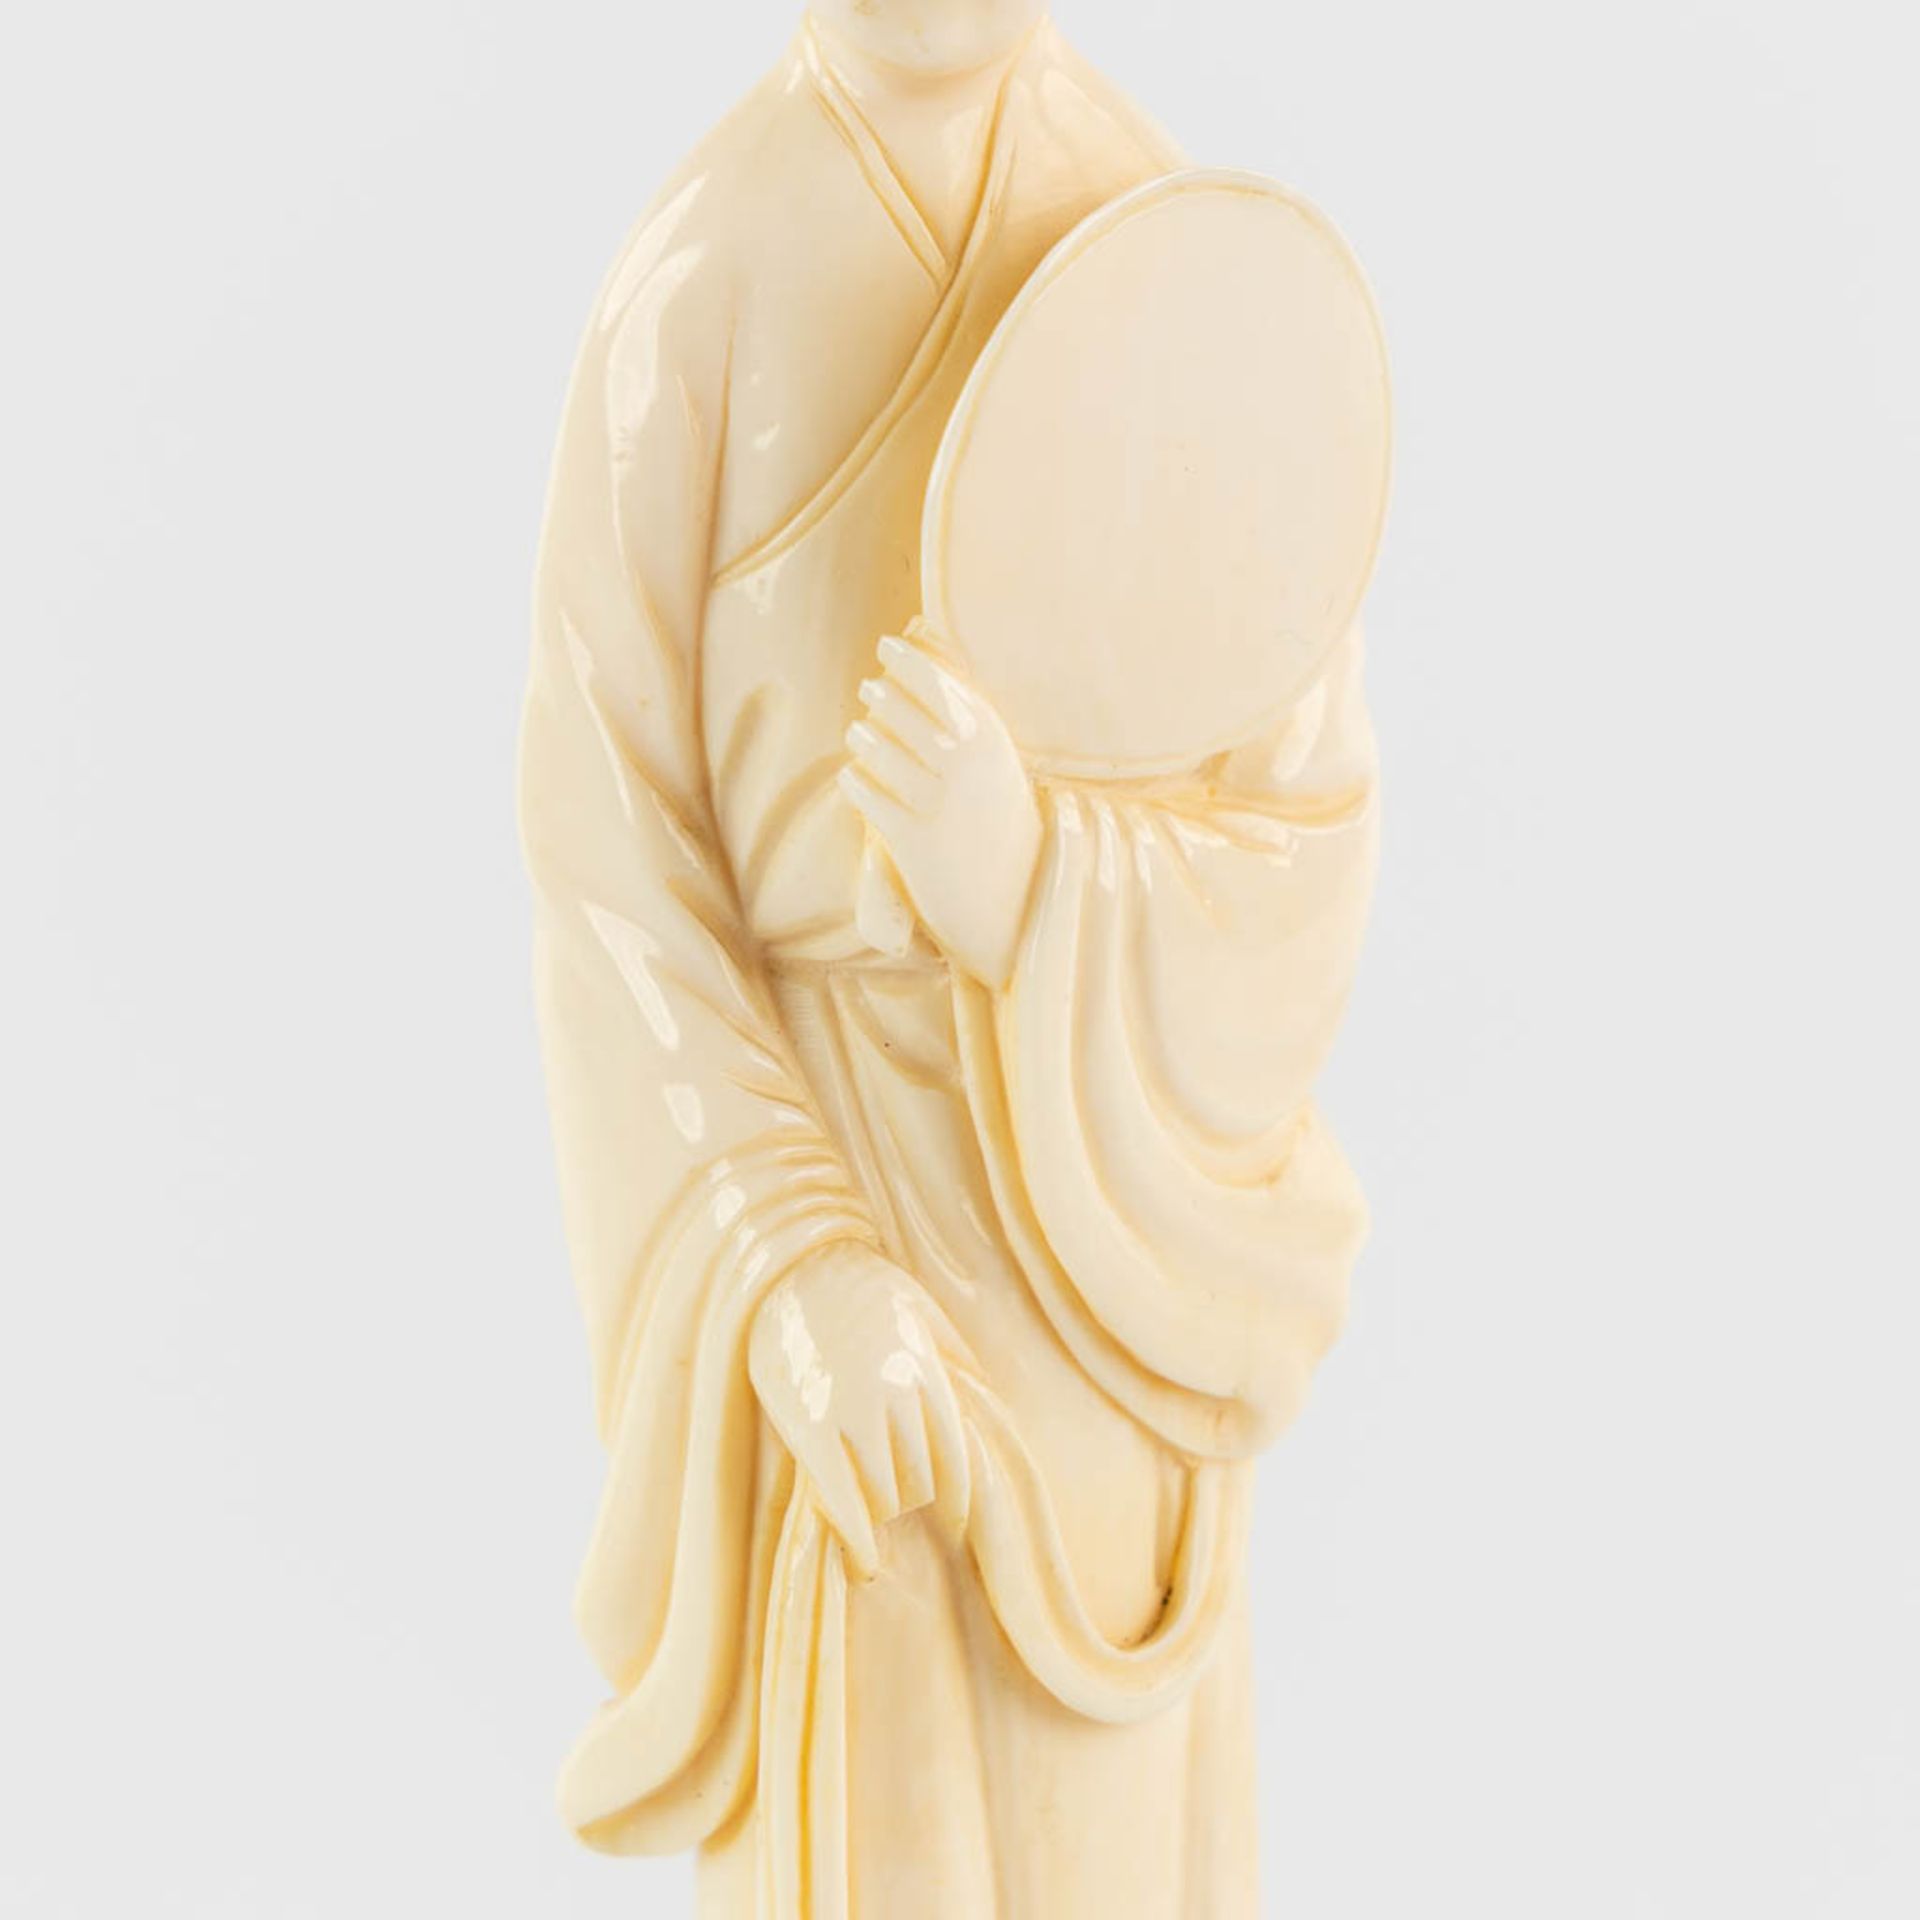 Figurine of a Beauty with mirror, sculptured ivory, China. (L:2,5 x W:4 x H:18 cm) - Image 9 of 9